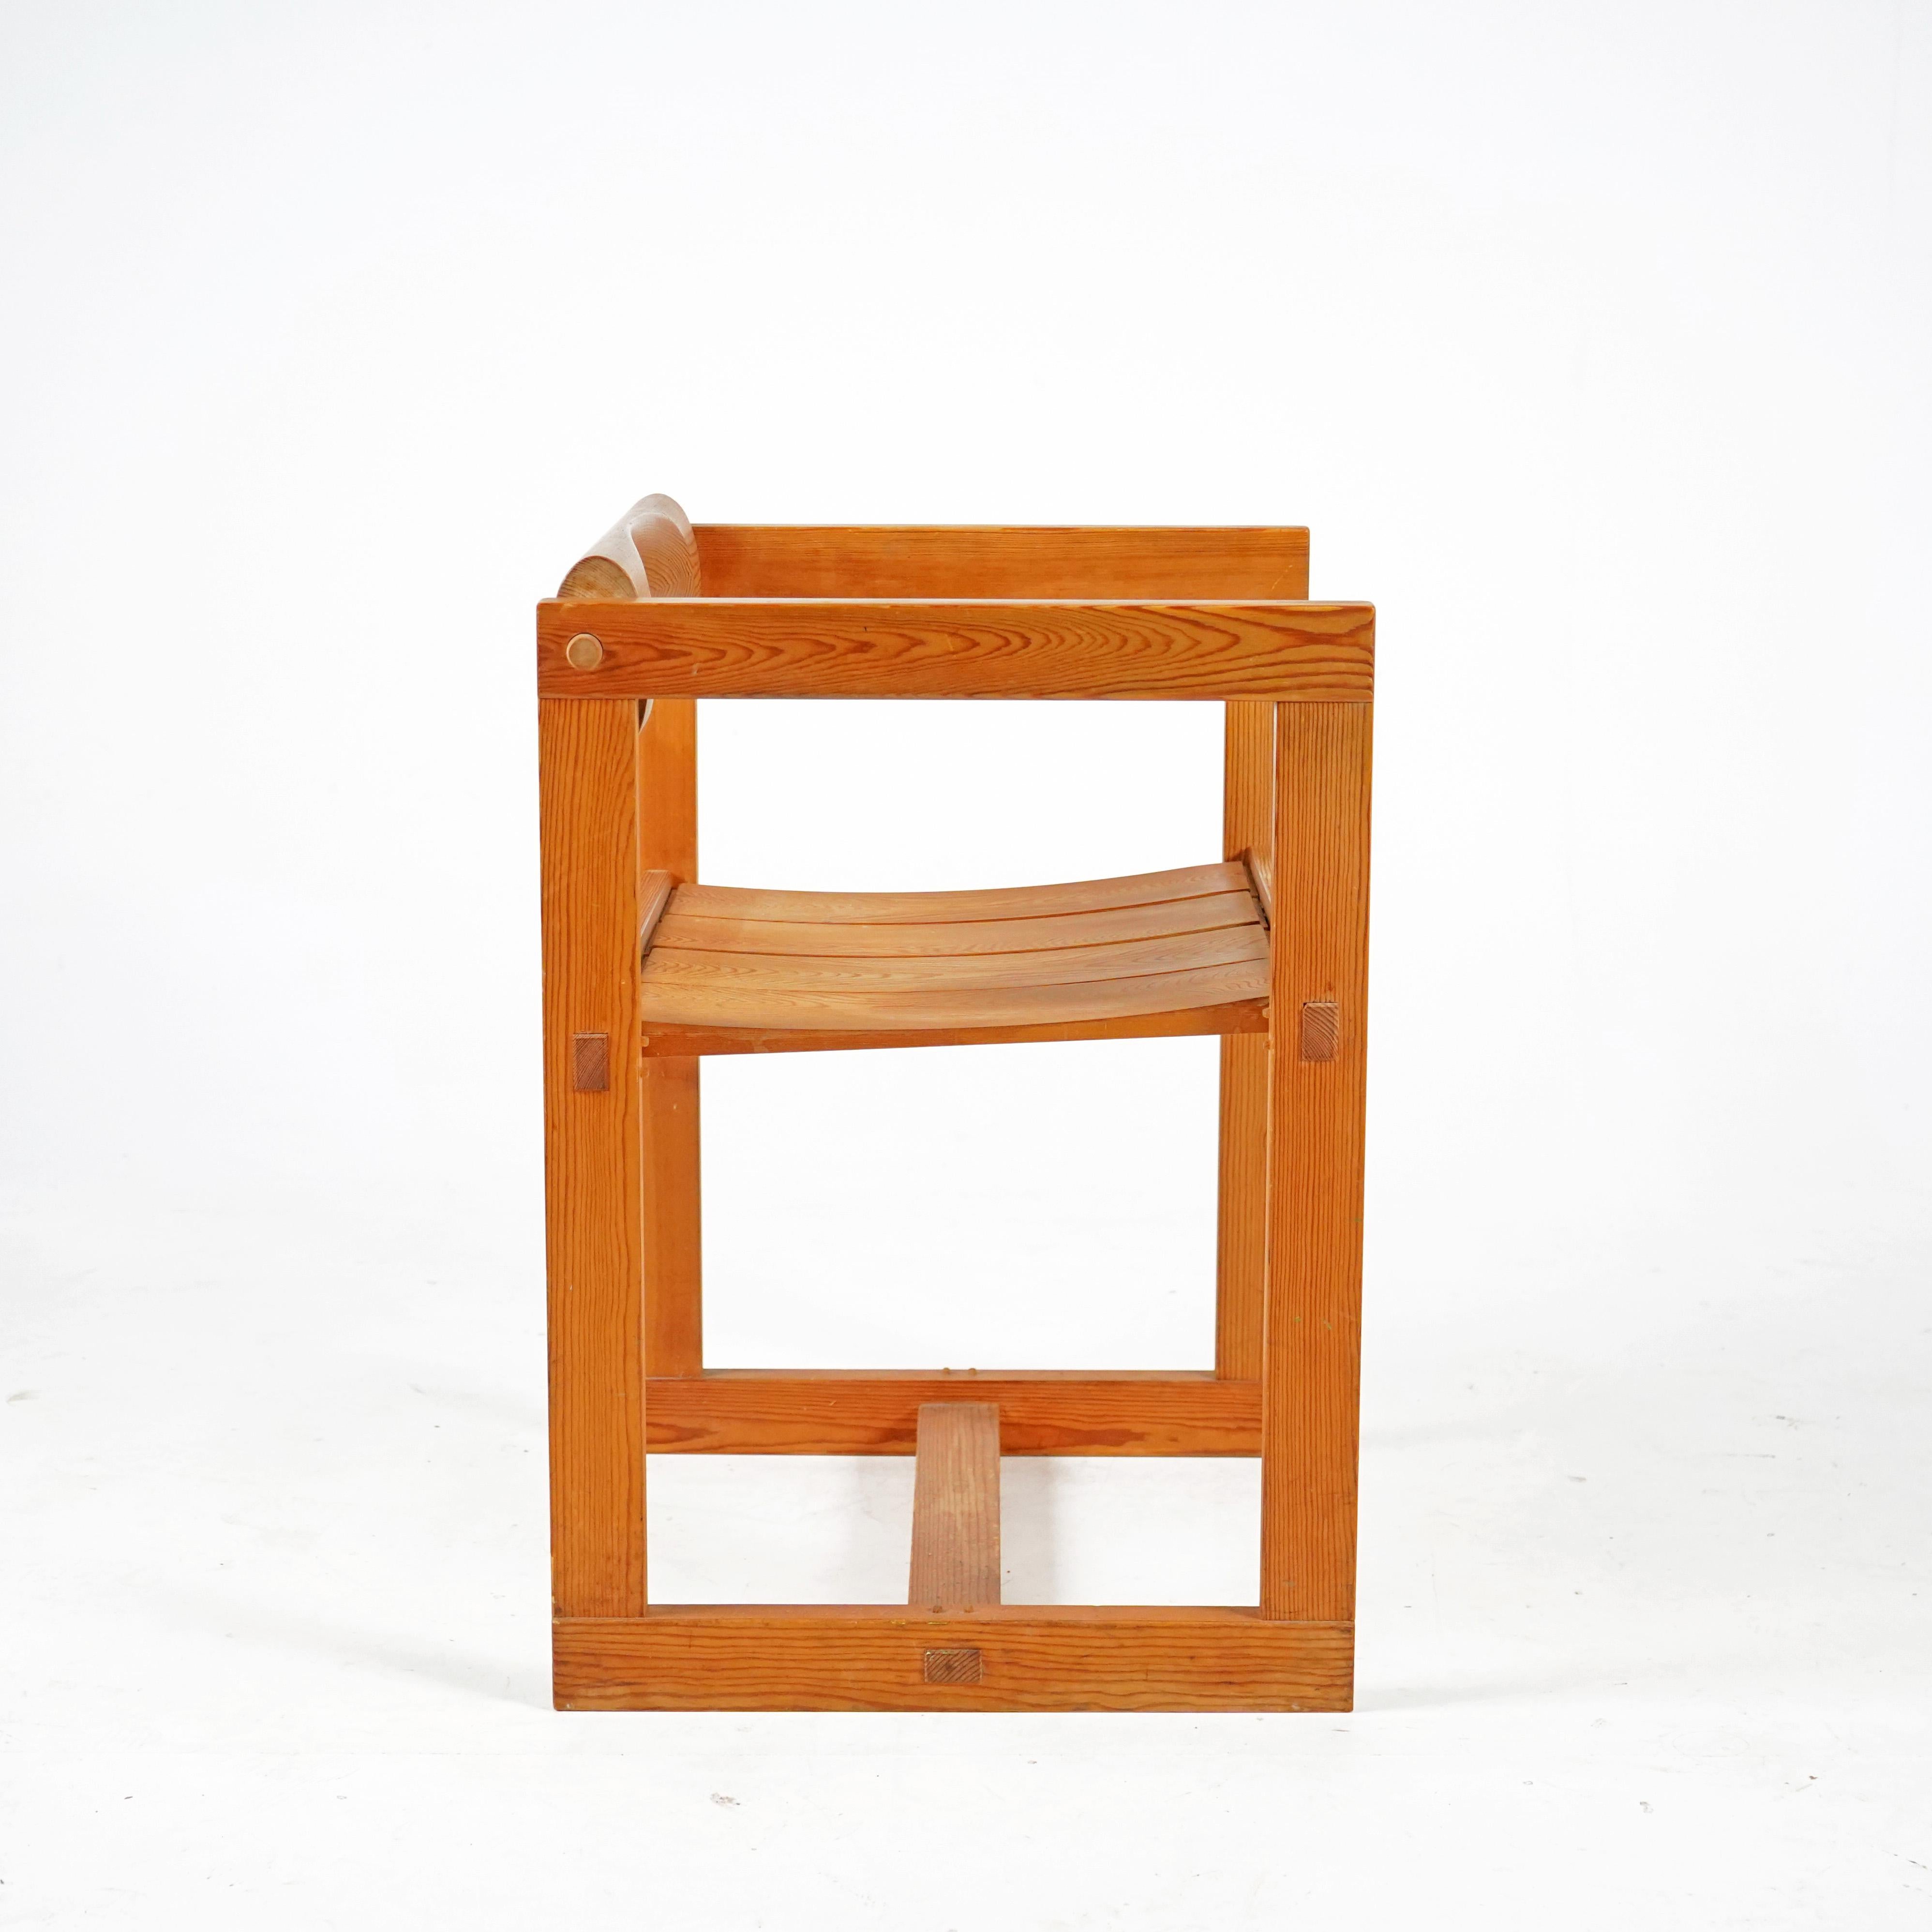 Wood 313 Chair By Edvin Helseth For Trybo For Sale